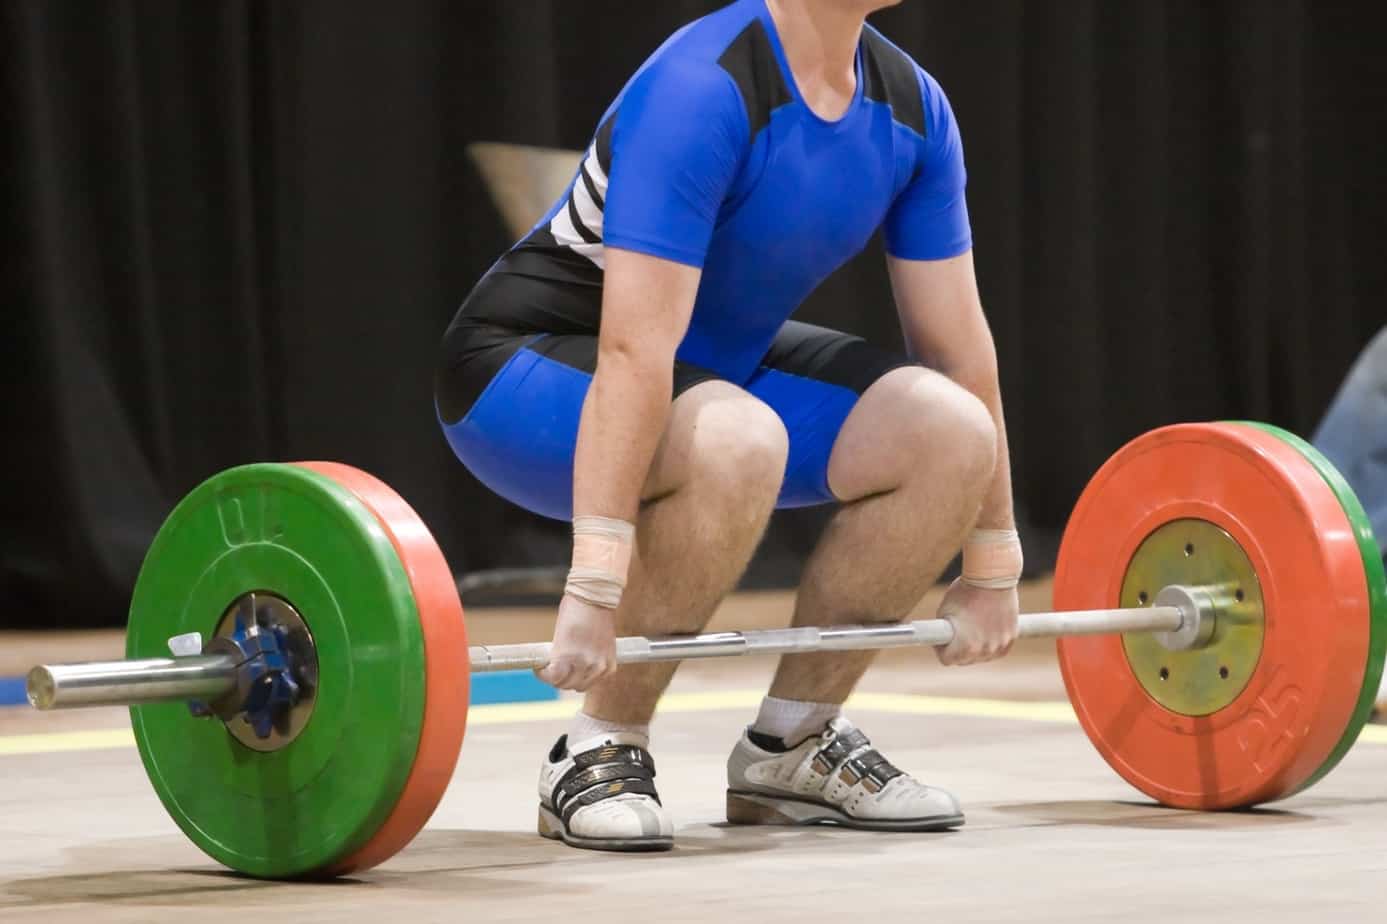 Weightlifting shoes: Are they really needed (and what about going bare  feet)?